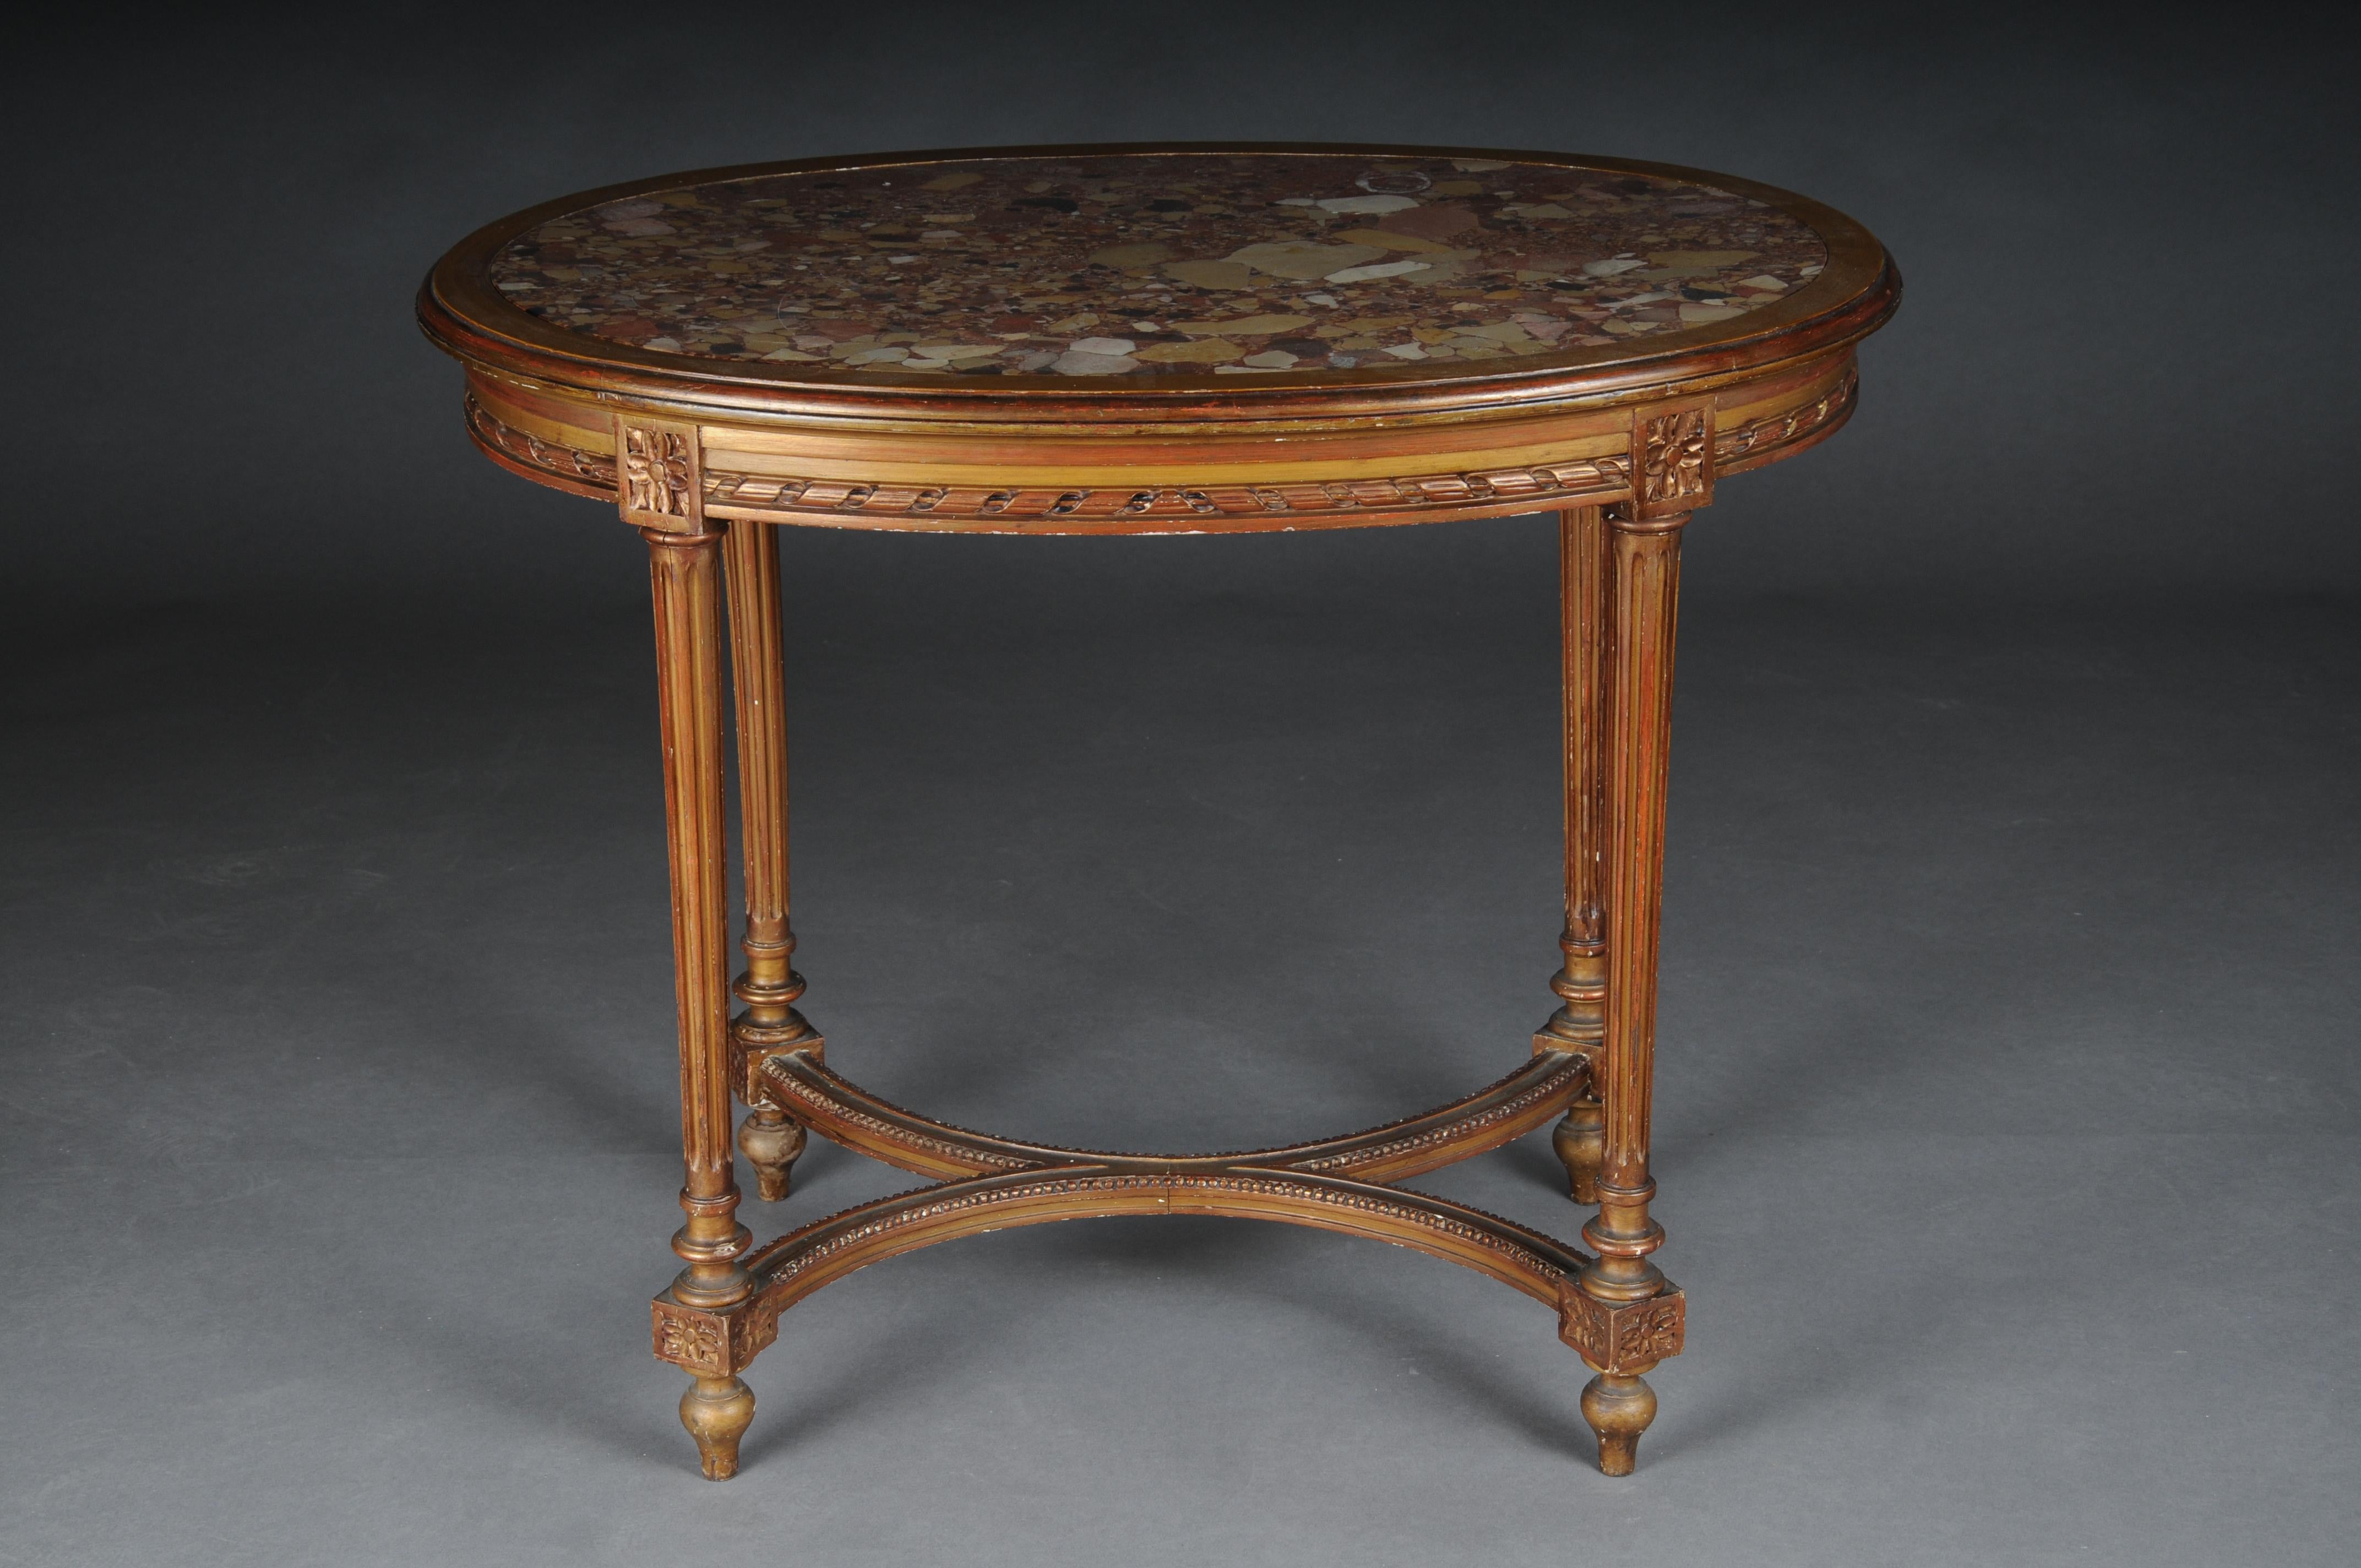 Classic Louis XVI salon table/side table, beech.

Hand-carved Louis XVI elements with tall fluted legs connected by an X-shaped bridge.

Oval mottled marble top.